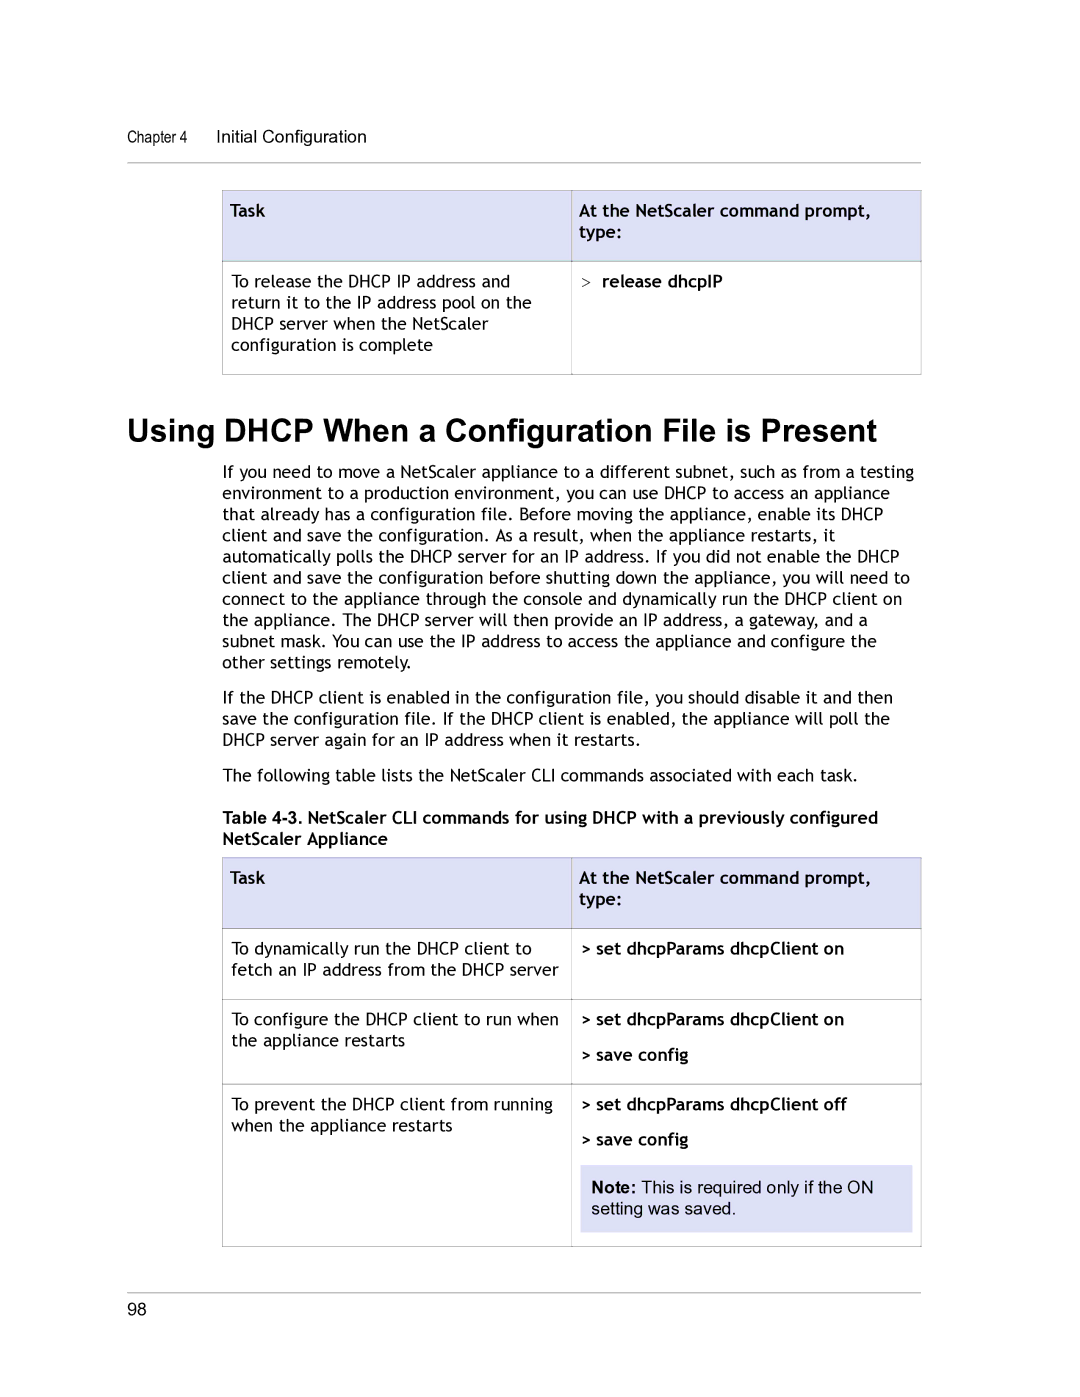 Citrix Systems 9.3 setup guide Using Dhcp When a Configuration File is Present 